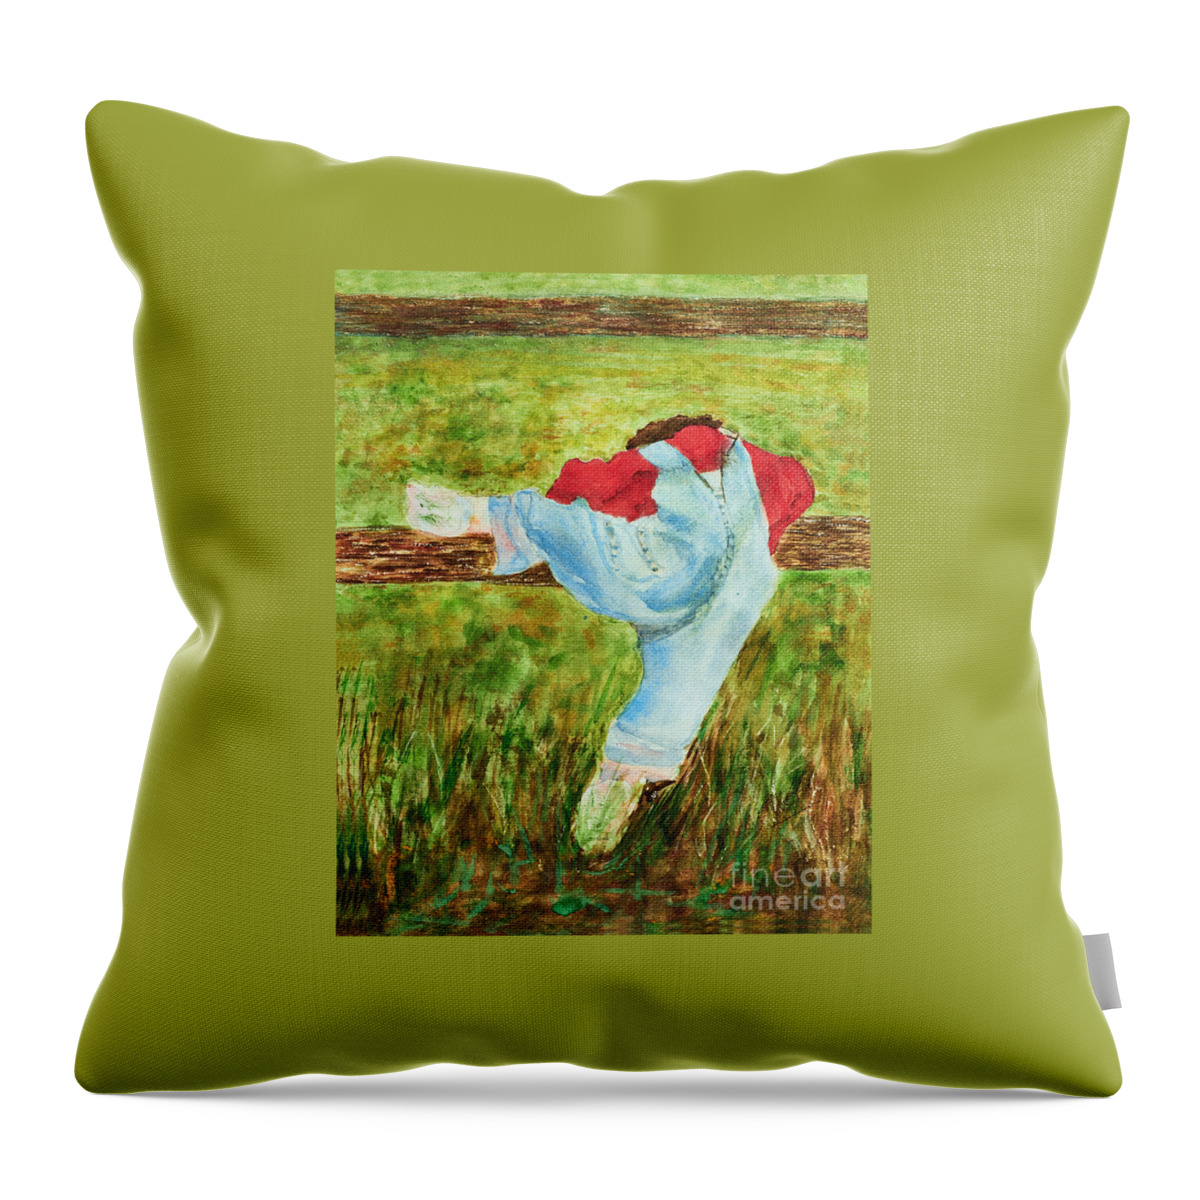 Art - Watercolor Throw Pillow featuring the painting Hide and Seek Watercolor painting by Sher Nasser